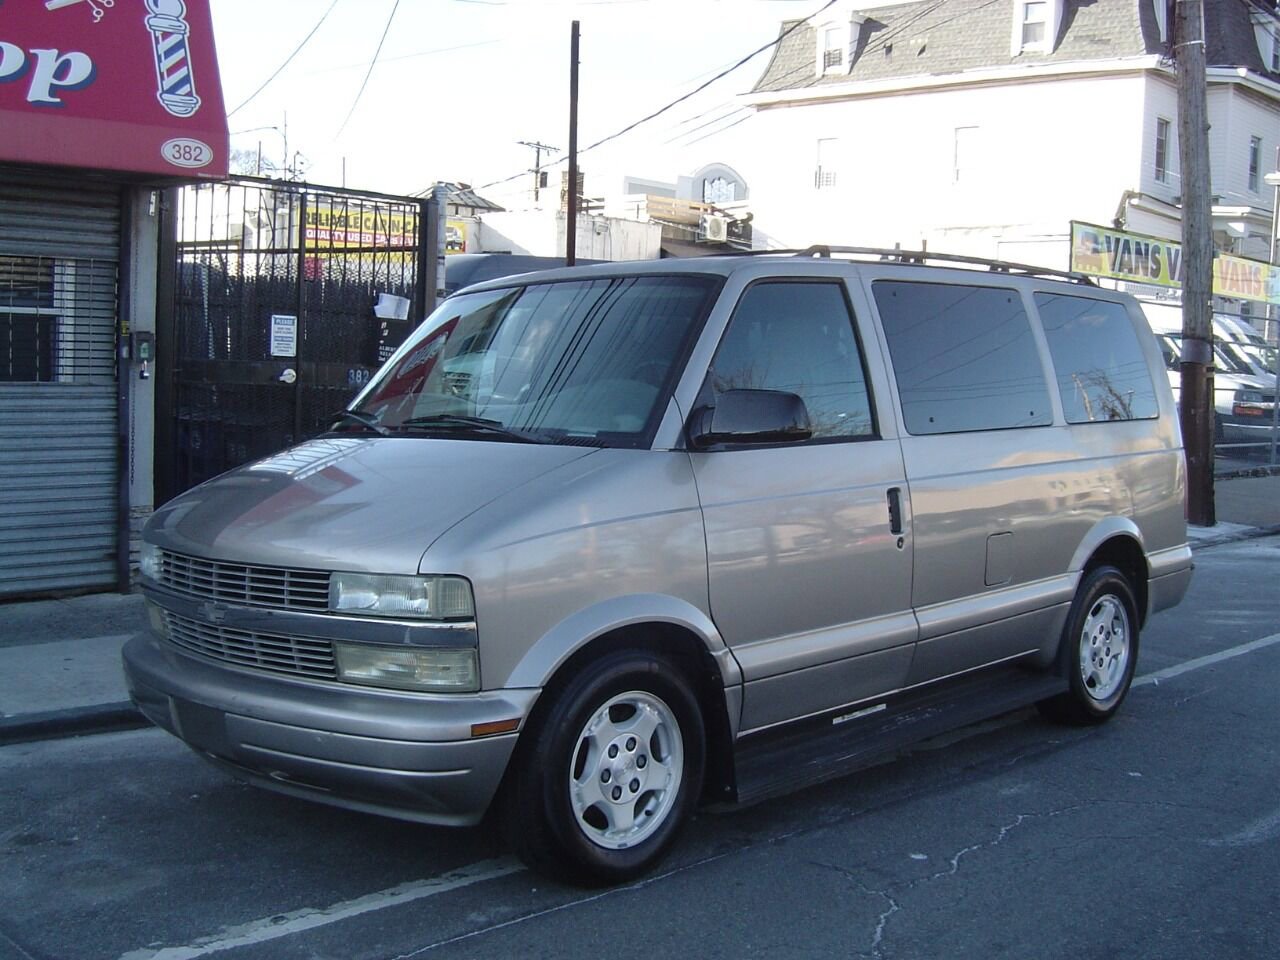 Used Chevrolet Astro for Sale Near Me in New York, NY - Autotrader